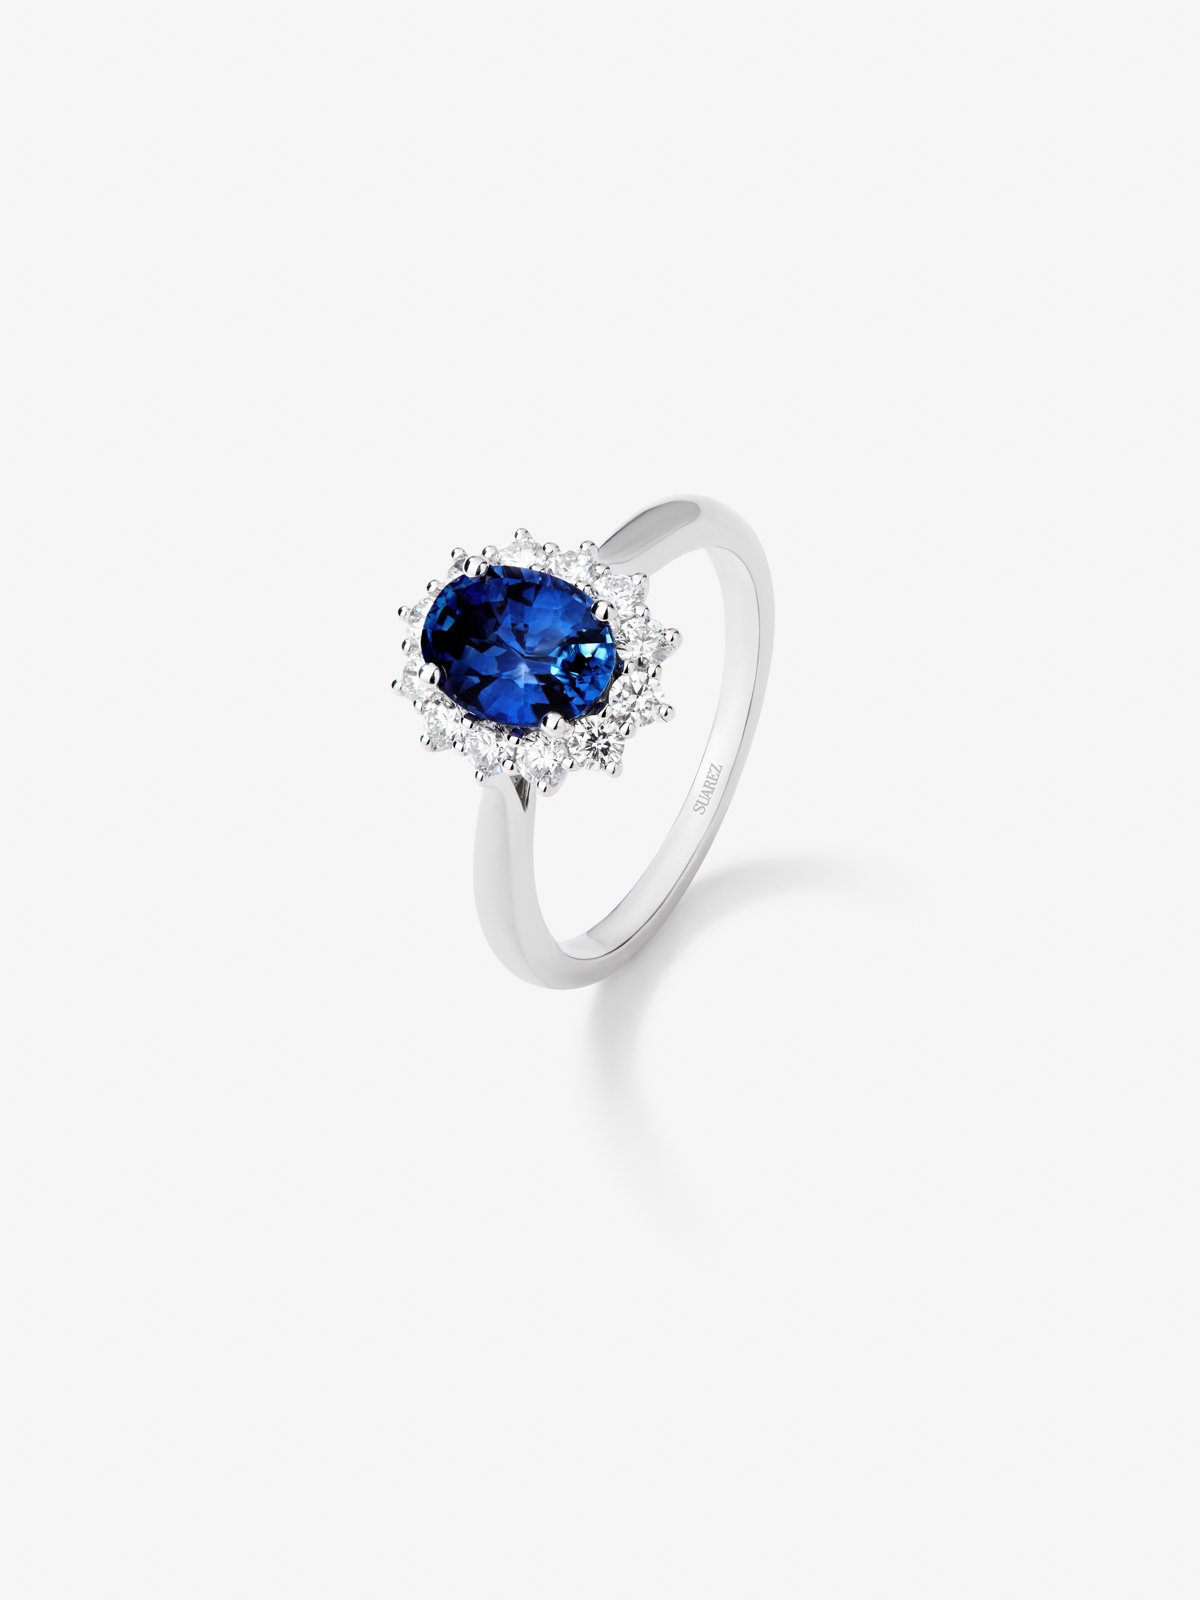 18K White Gold Ring with Royal Blue Zafiro in 2.02 cts oval size